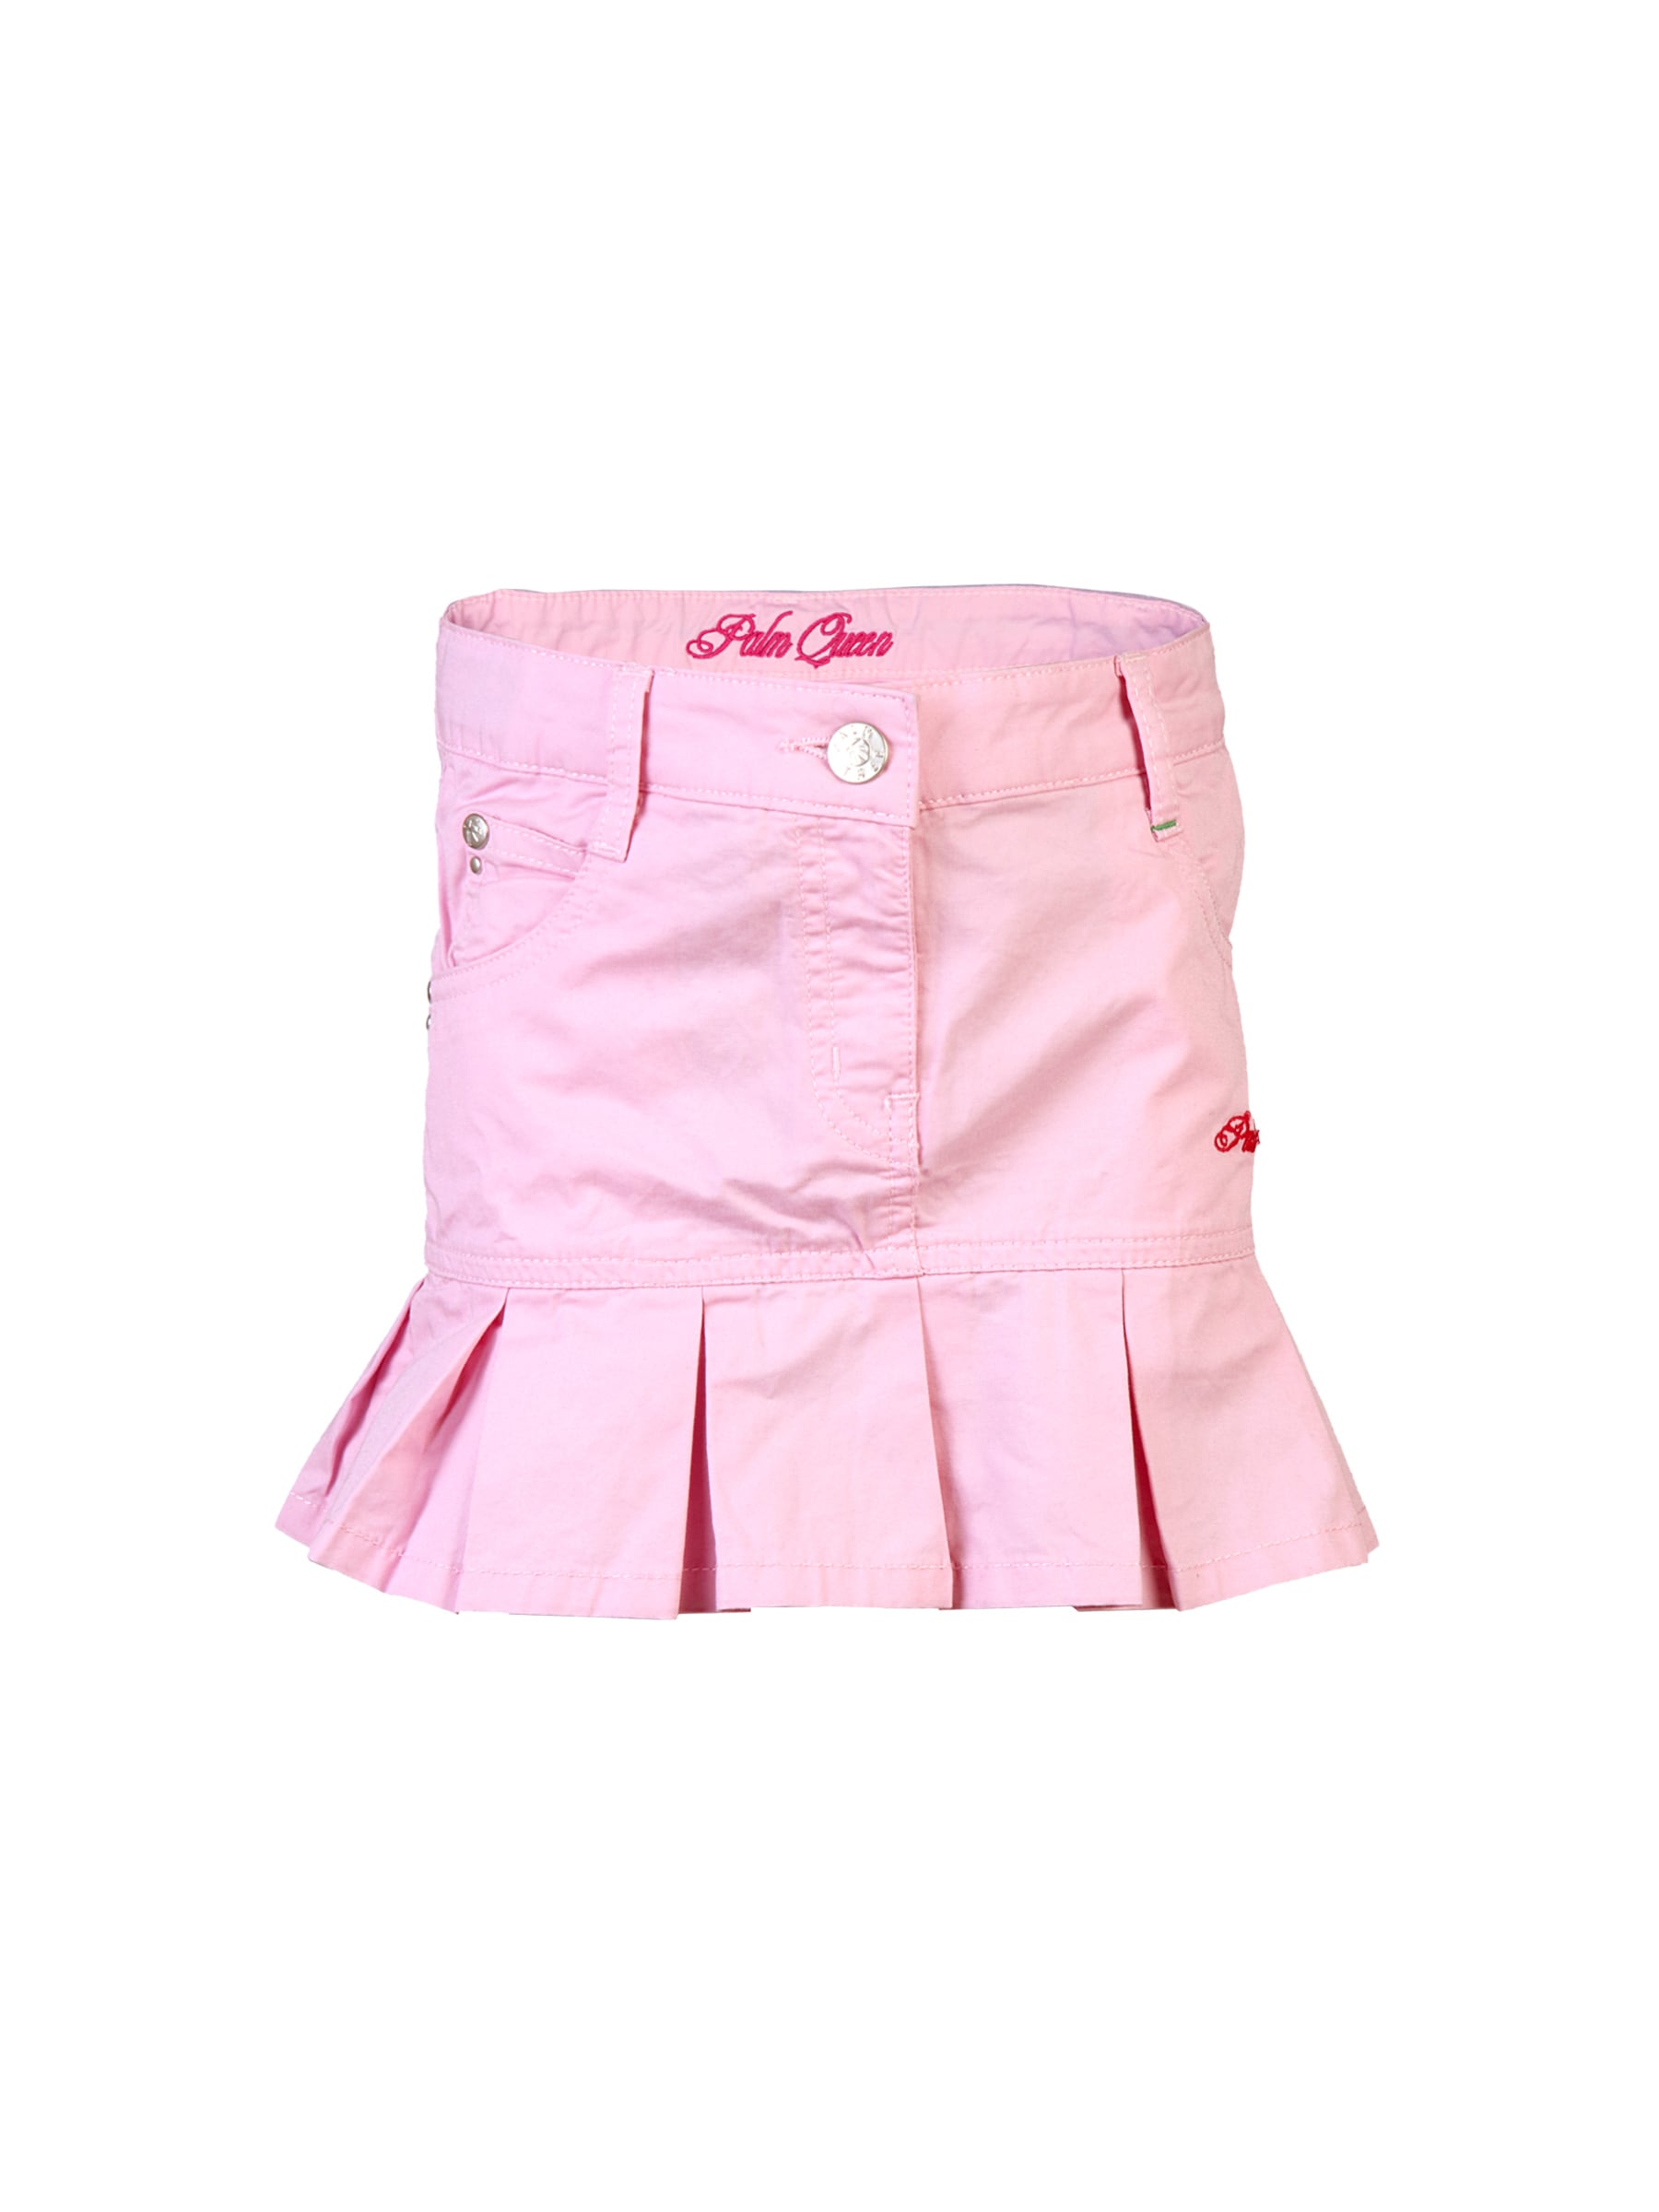 Palm Tree Kids Girl Solid Pink Skirts